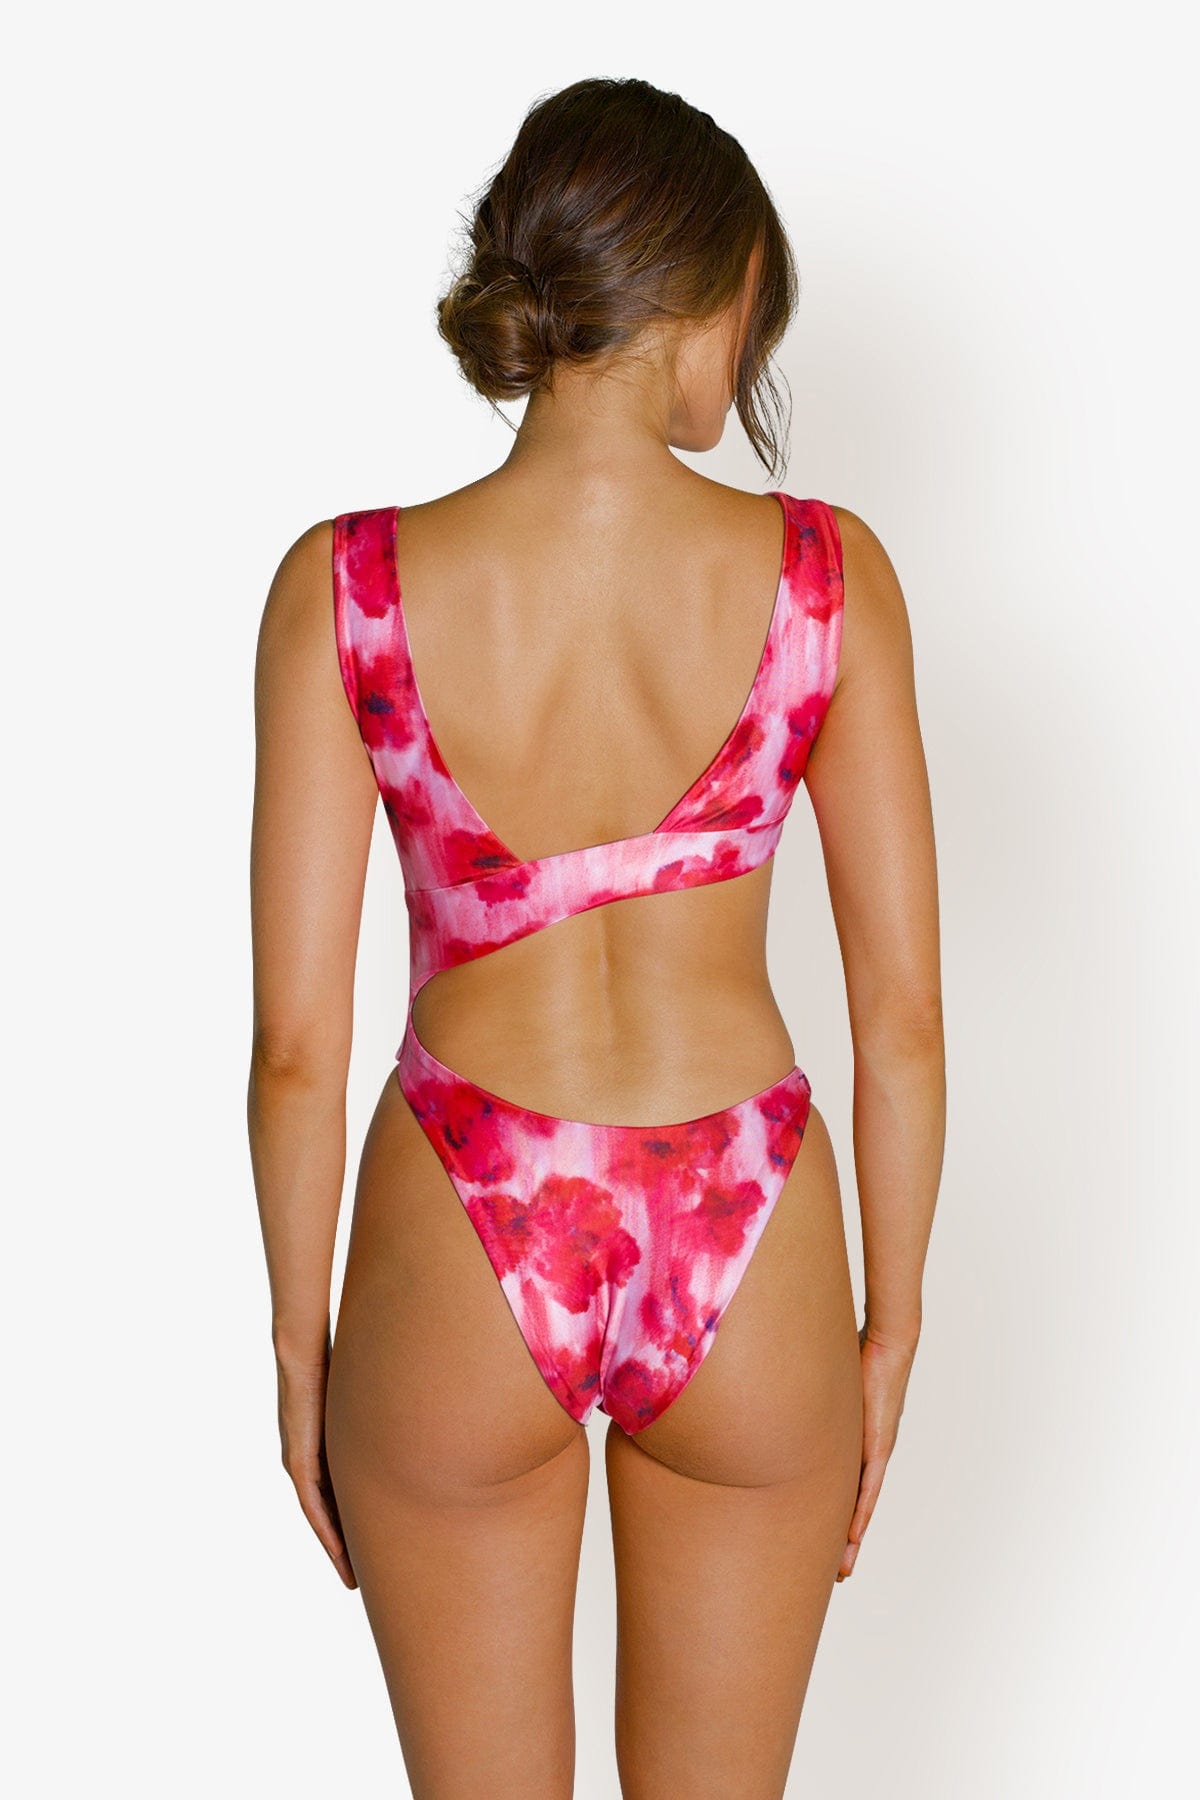 Gisele V-Neck Cut Out One Piece Swimsuit in PÃ©tale Floral Print by ALT Swim